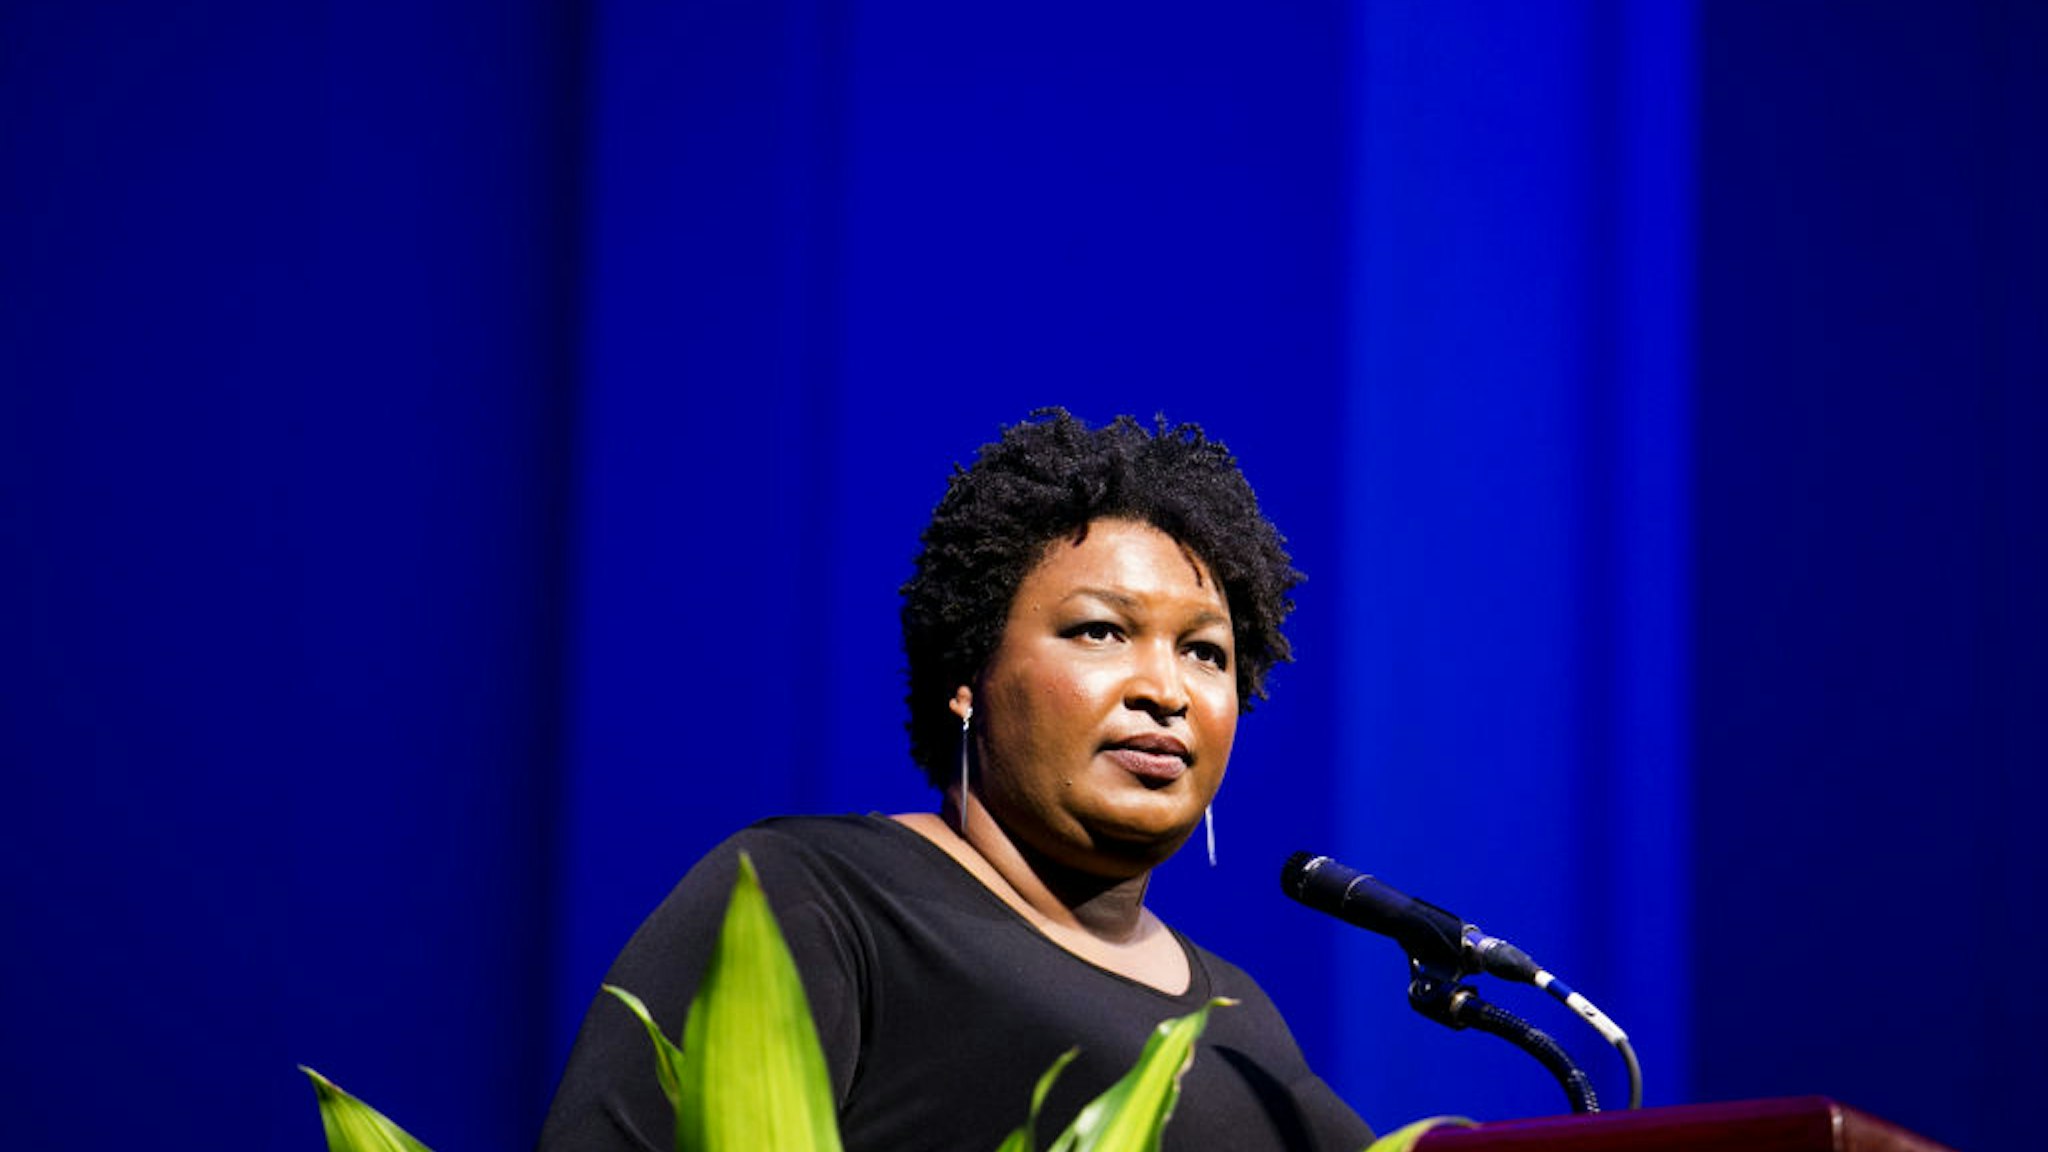 Stacey Abrams, former state Representative from Georgia, pauses while speaking during the 110th NAACP Annual Convention in Detroit, Michigan, U.S., on Monday, July 22, 2019. Democrats are launching a campaign in seven battleground states to make the case against Donald Trump's economy, seeking to neutralize the president's strongest political asset as his re-election campaign heats up.